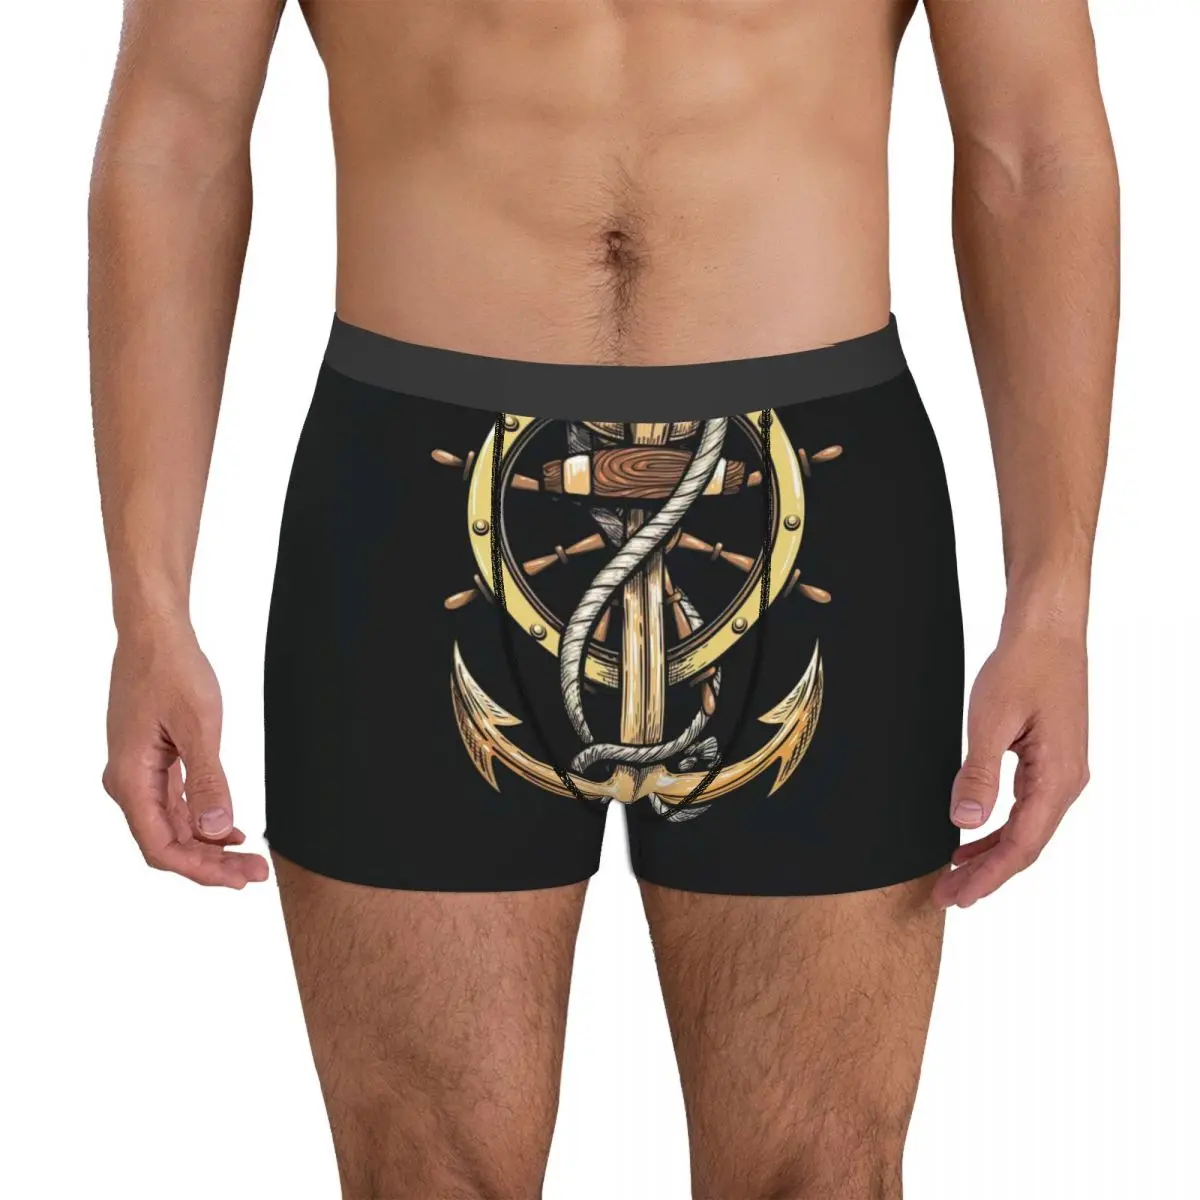 Anchor In Ropes And Ship Wheel Underpants Breathbale Panties Male Underwear Print Shorts Boxer Briefs shorts hope is an anchor to the soul pocket shorts in multicolor size l m